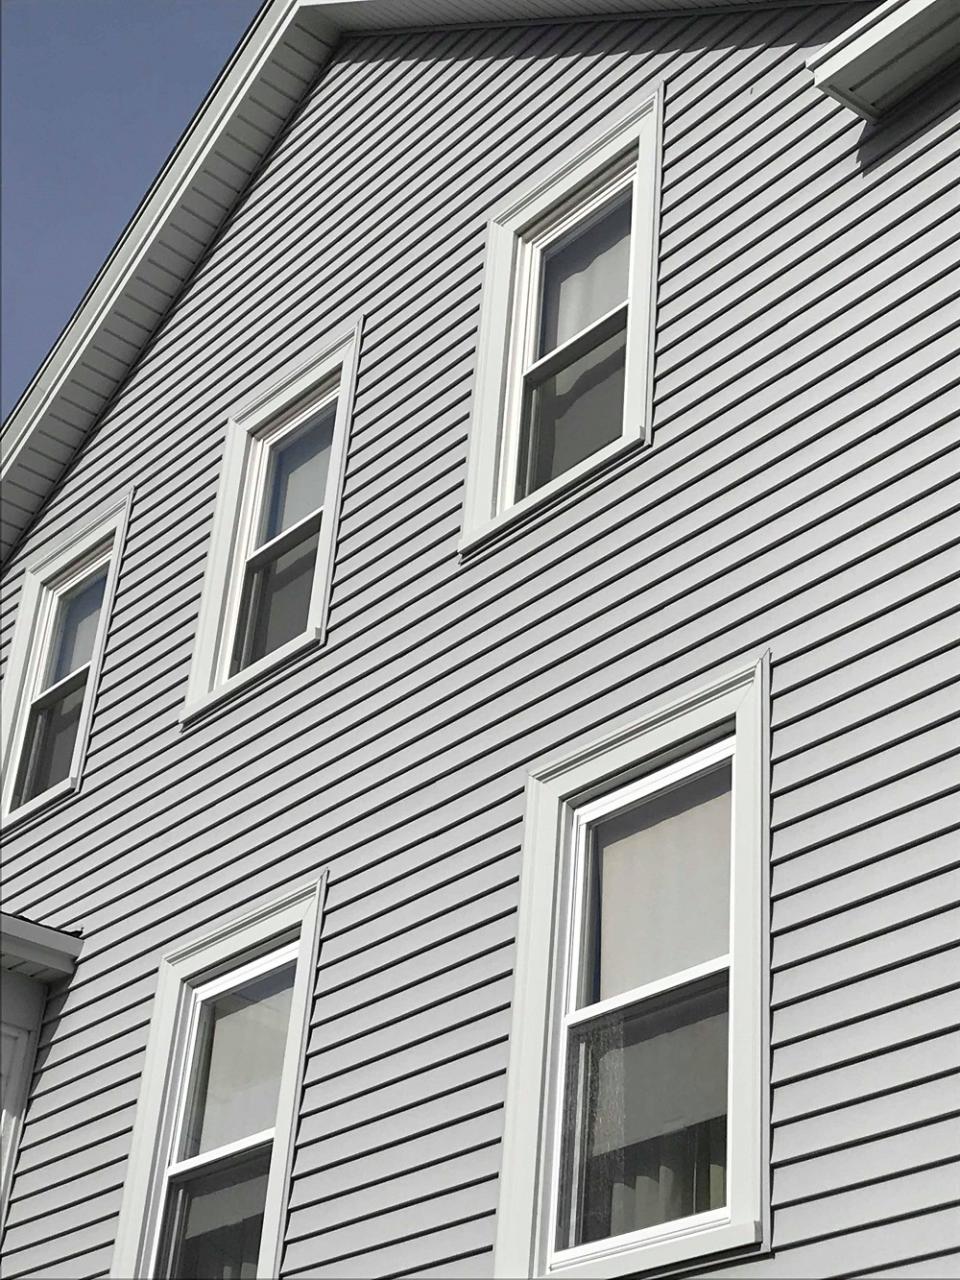 Mastic Carvedwood Vinyl Siding, New Bedford, MA | Contractor Cape Cod ...